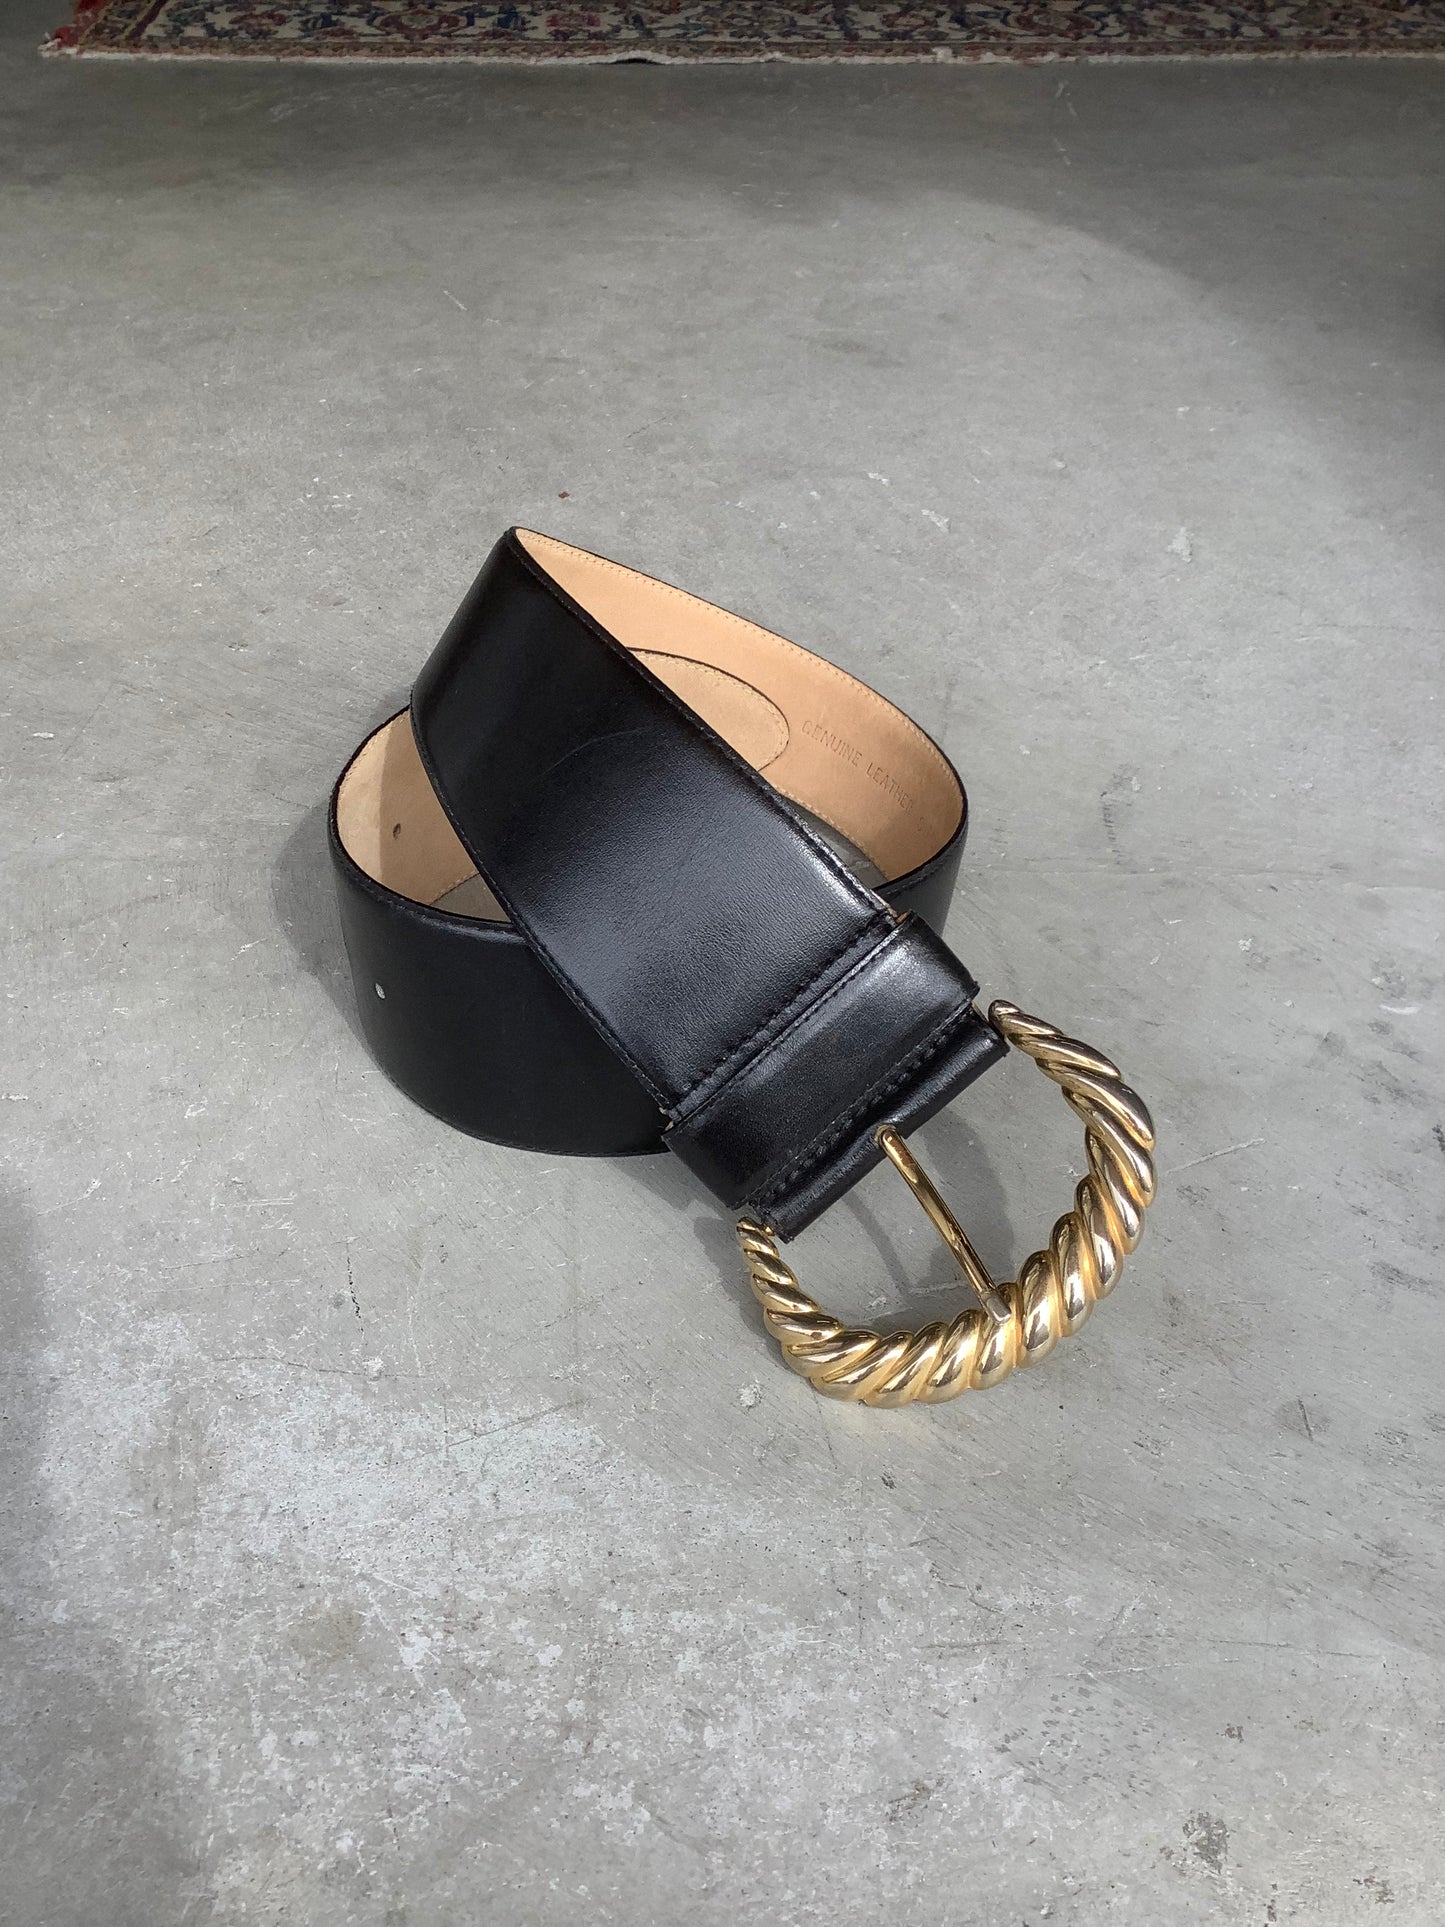 Wide black leather belt with big gold buckle